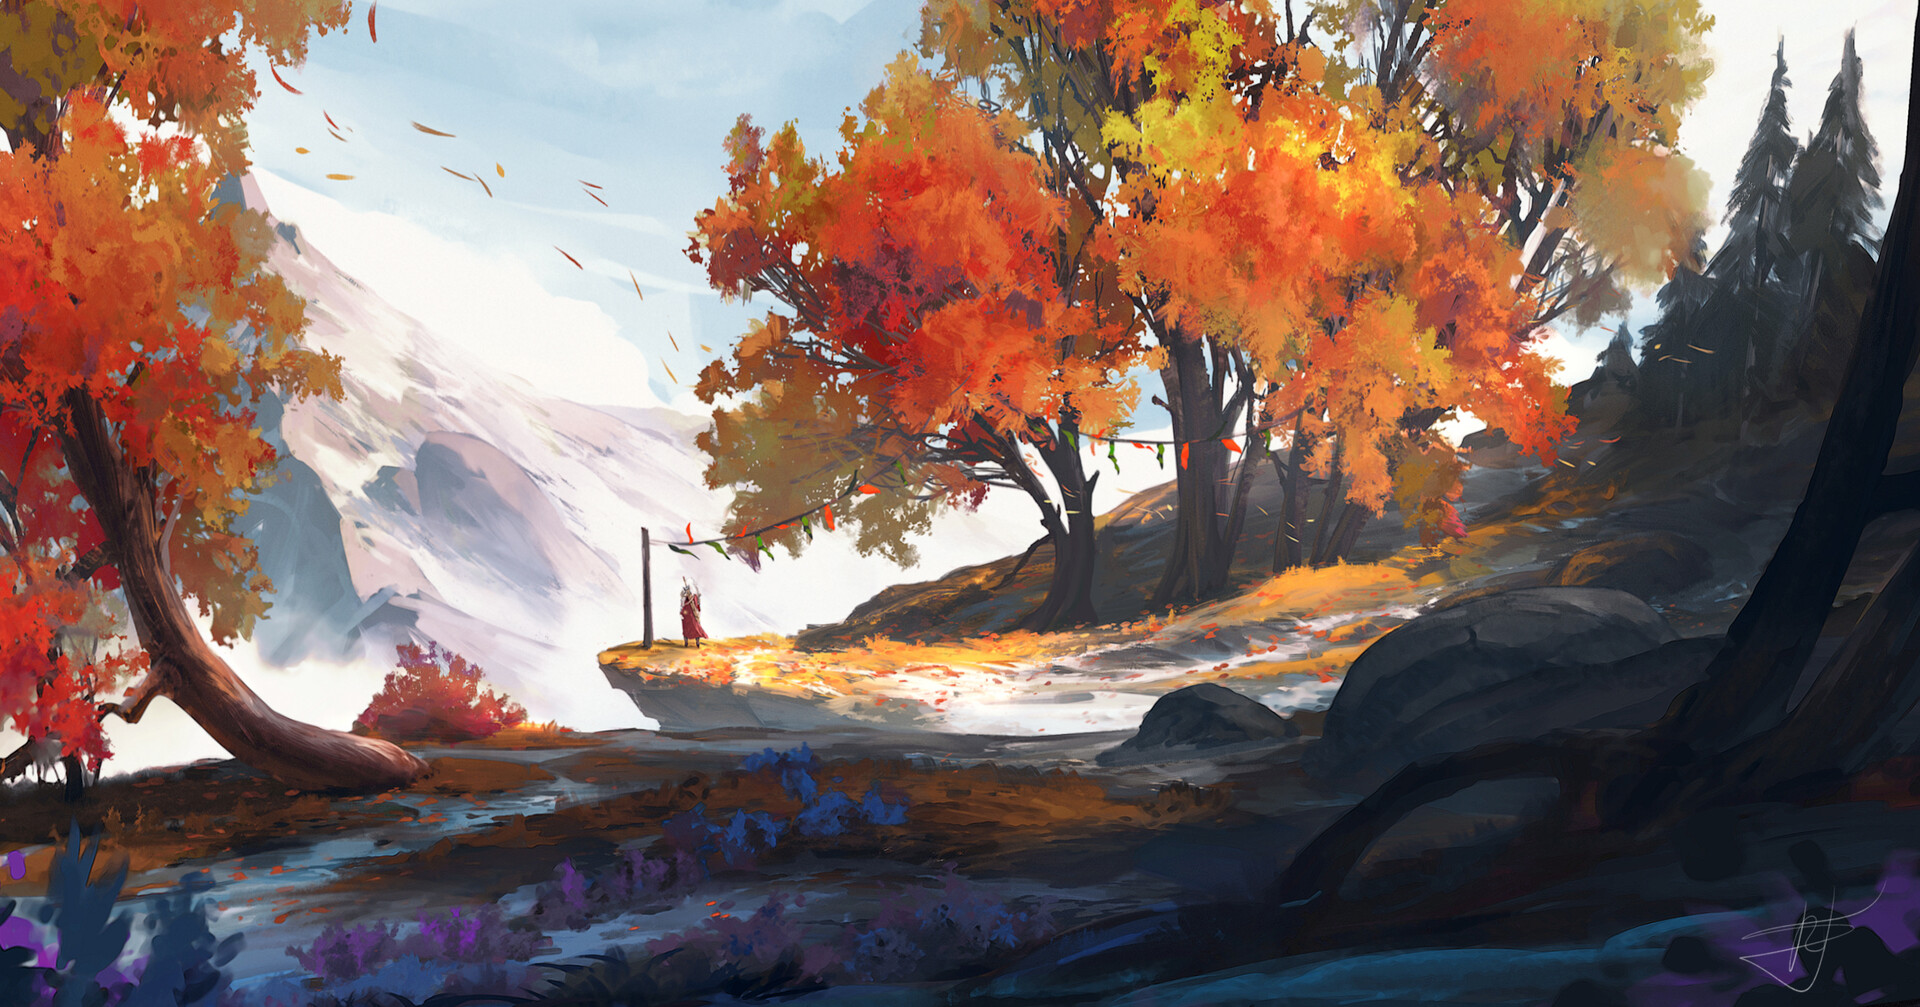 General 1920x1007 Max Suleimanov digital art fall trees red leaves mountains nature